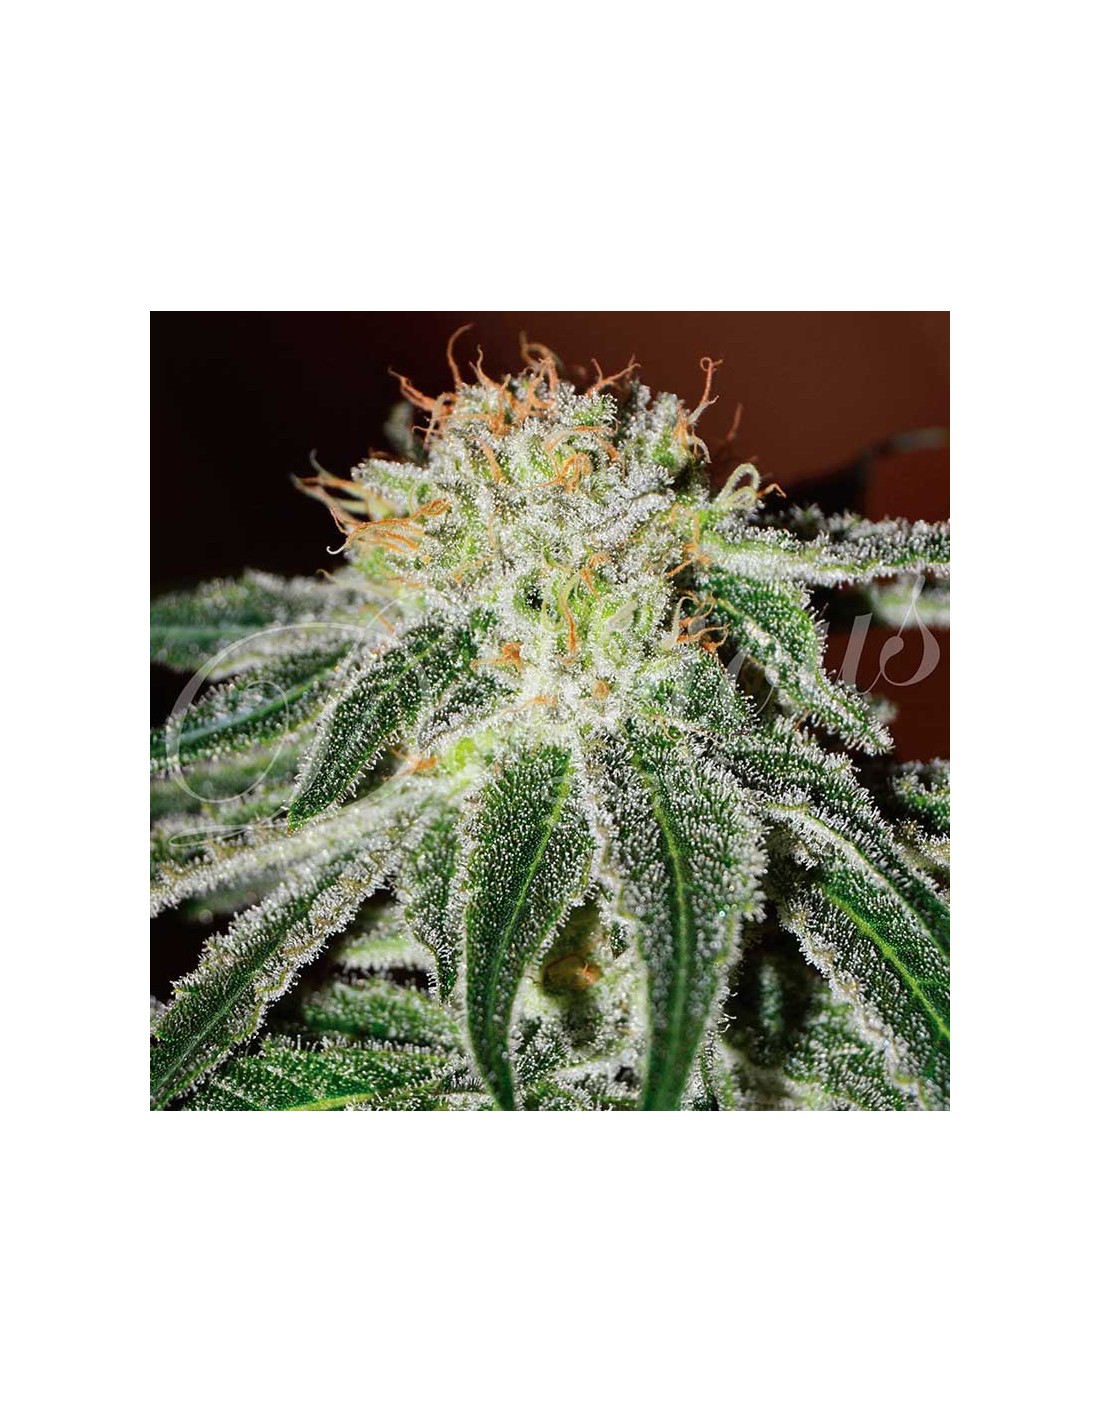 Buy Black Russian from Delicious Seeds - Oaseeds